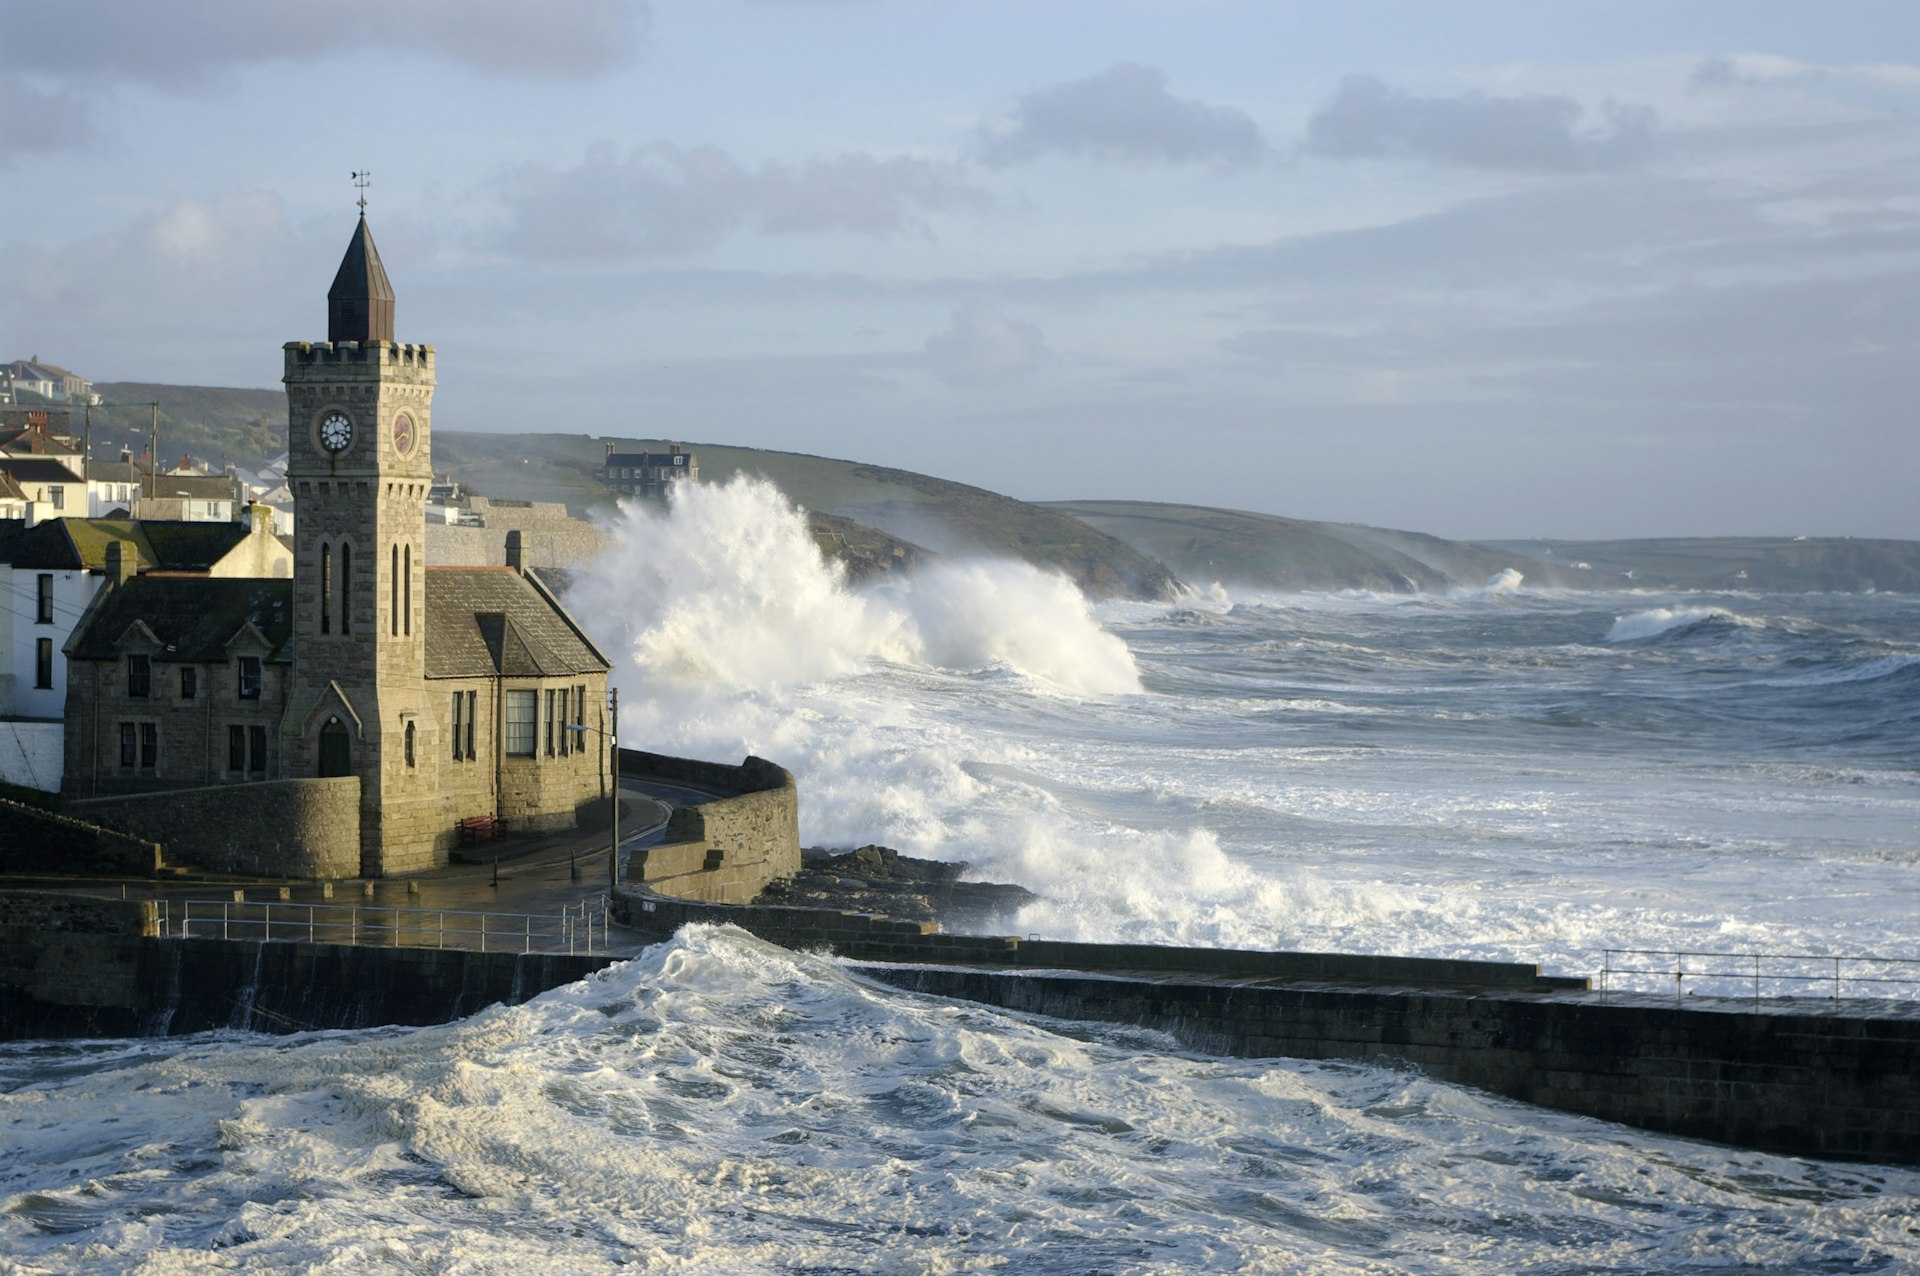 A stormy sea with big waves hitting the outer harbour at Porthleven in England